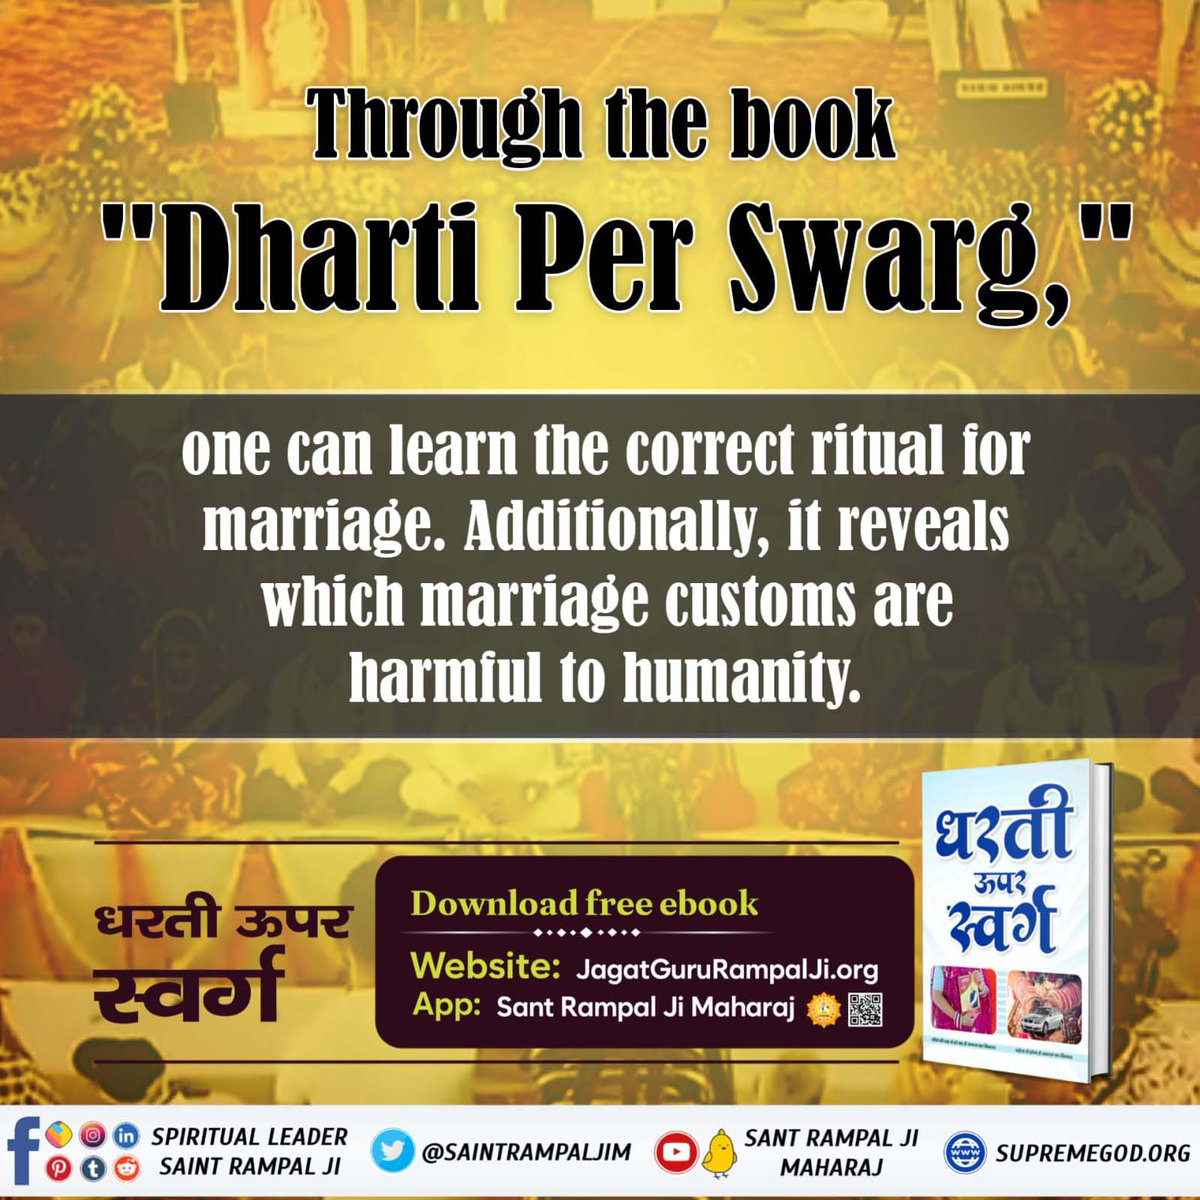 #धरती_को_स्वर्ग_बनाना_है

Through the book 'Dharti Per Swarg,'

one can learn the correct ritual for marriage. Additionally, it reveals which marriage customs are harmful to humanity.
Sant Rampal Ji Maharaj